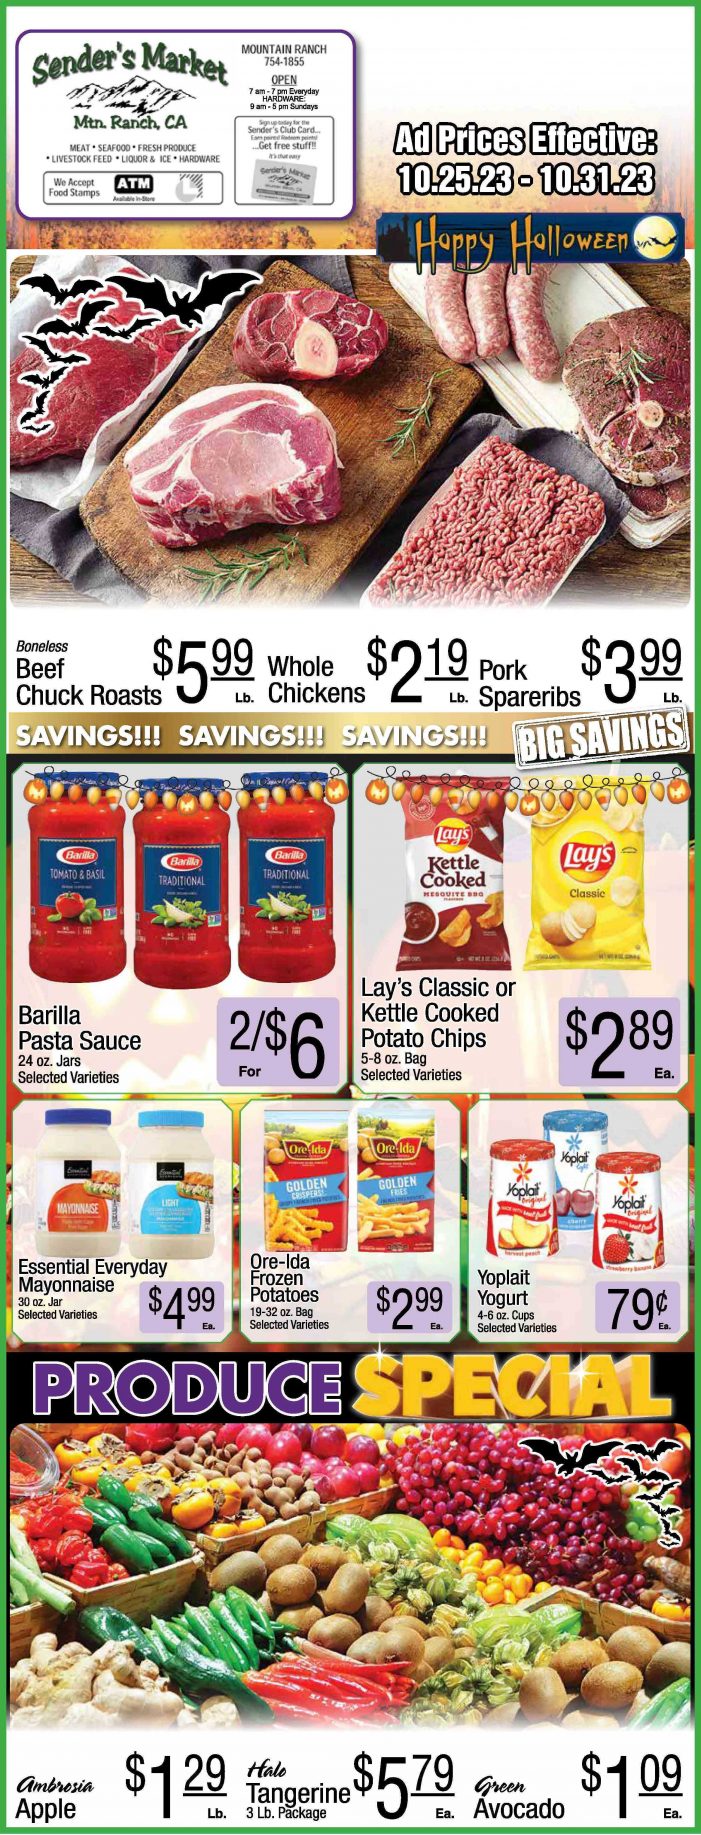 Sender’s Market Weekly Ad & Grocery Specials Through October 31st! Shop Local & Save!!